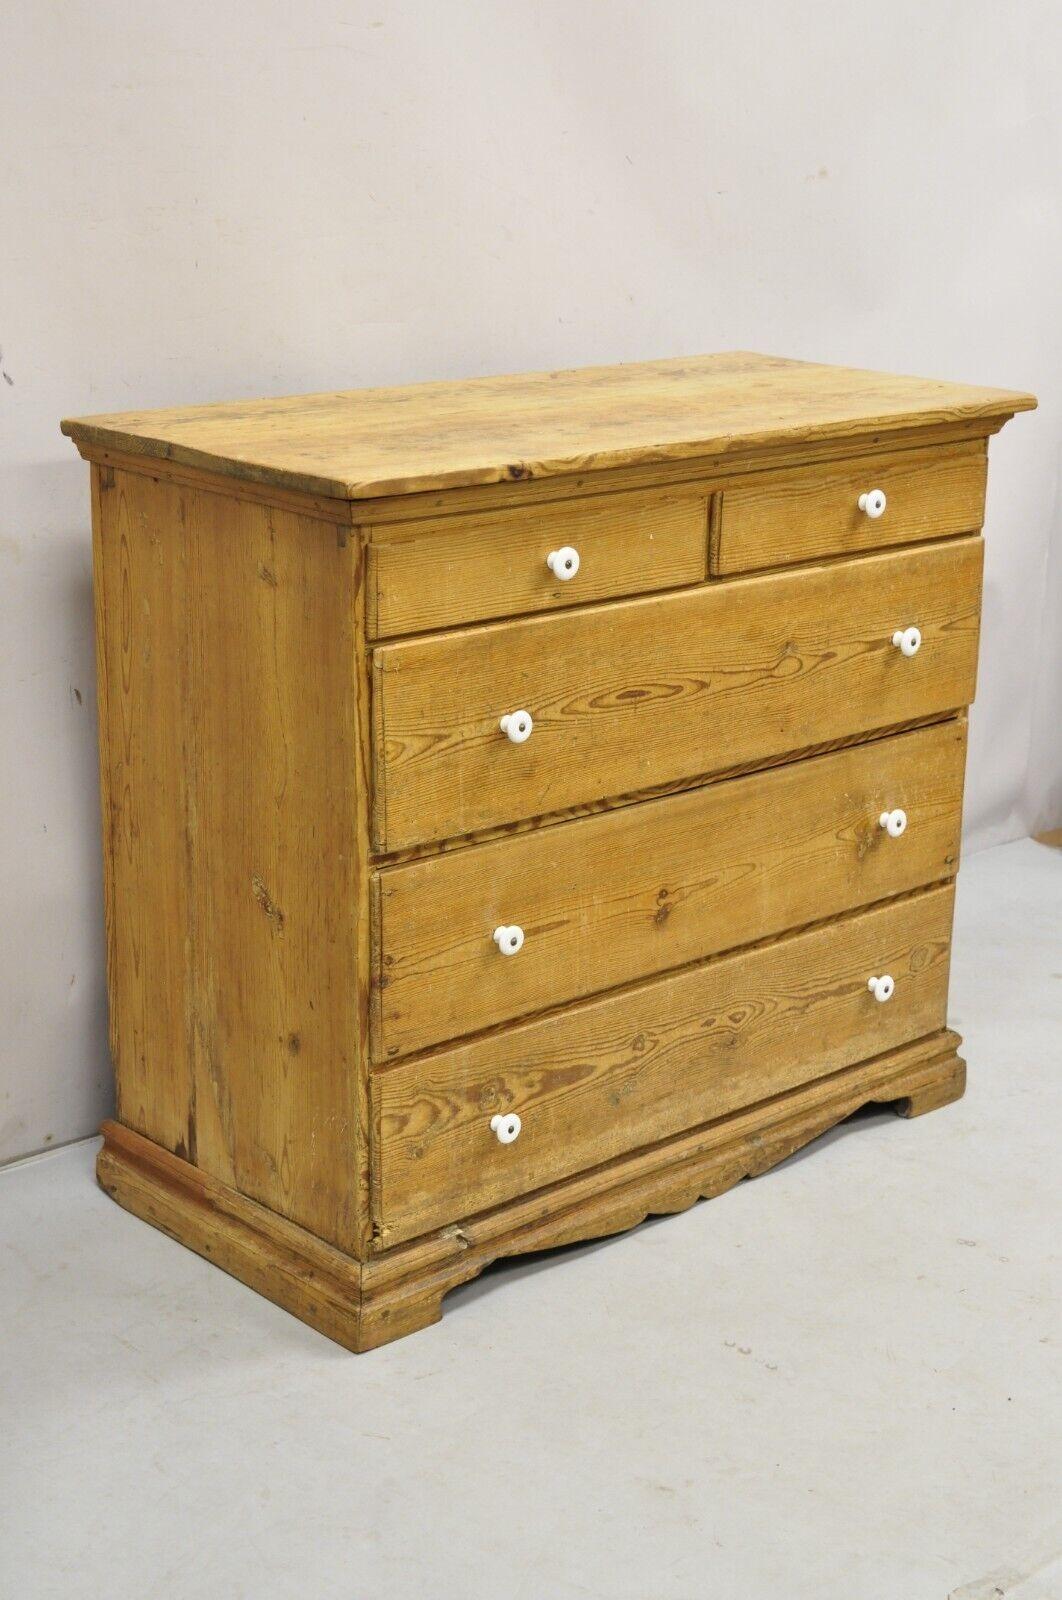 Antique 5 Drawer French Country Farmhouse Primitive Pine Dresser Chest of Drawers. Item features desirable weathered/distressed finish, solid wood construction, hand dovetailed drawers (except top left drawer), very nice Primitive chest. Circa 19th